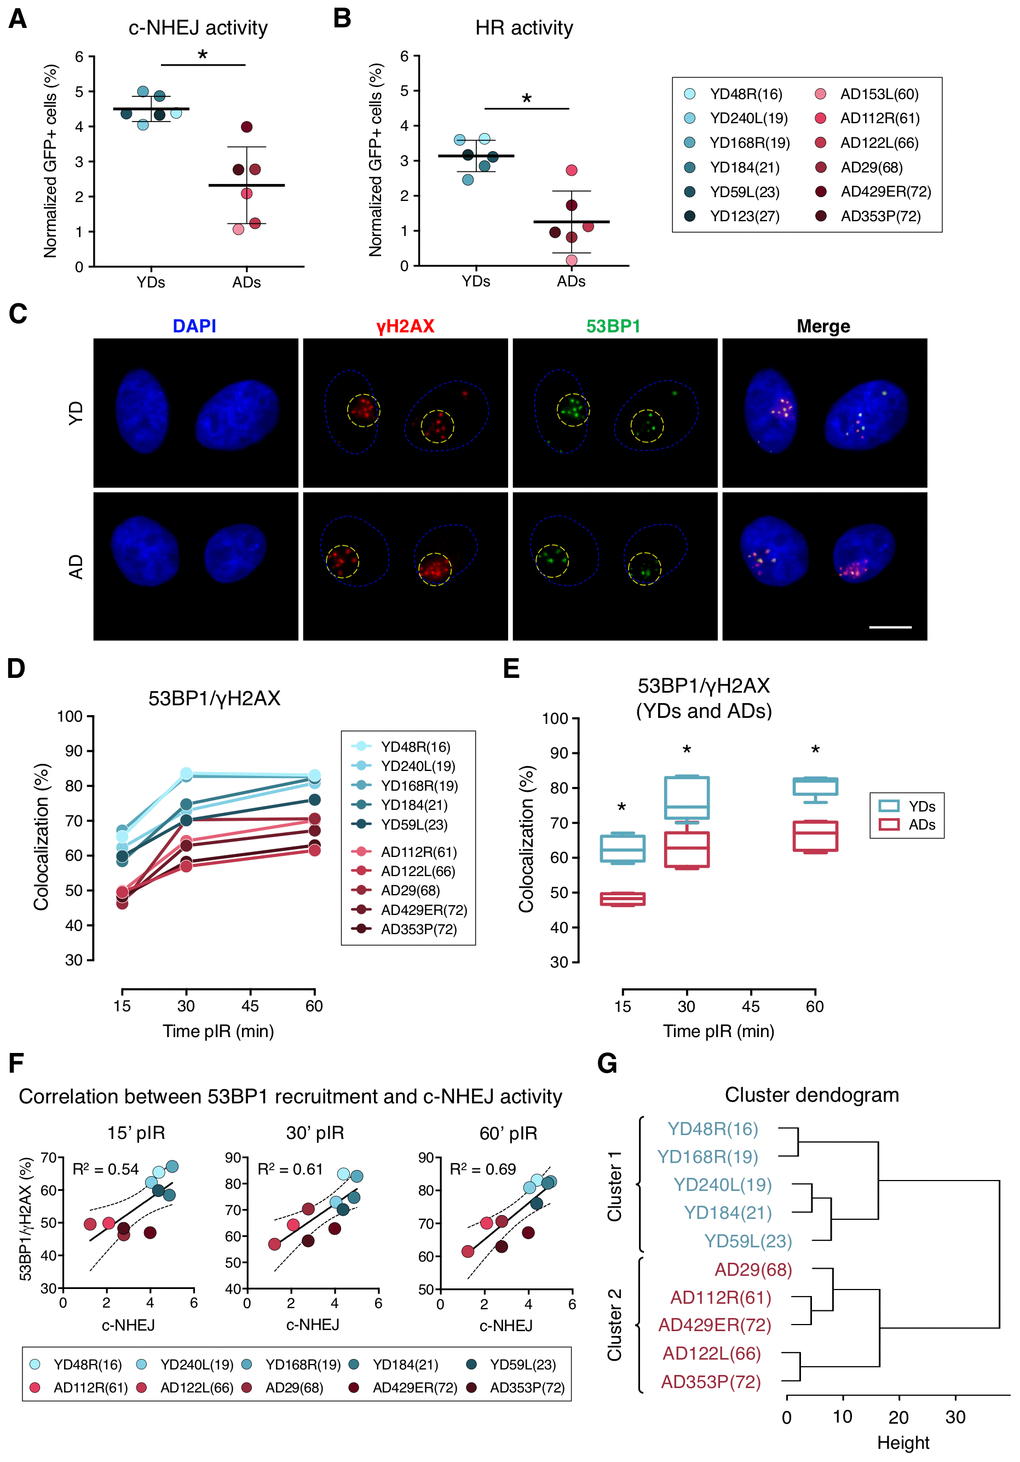 Decreased efficiency of DNA–DSB repair and deficient recruitment of 53BP1 in aged donor cells. (A, B) Normalized frequency of GFP-positive cells after co-transfection with pimEJ5GFP (A) or pDRGFP (B) and the I-SceI expressing plasmids. Mean and SD are indicated (* p t-test). (C) Immunofluorescent labeling of cell nuclei (DAPI, blue), γH2AX (Cy3, red) and 53BP1 (A488, green). γH2AX and 53BP1 foci were scored within the irradiated pore area (yellow dotted lines). Scale bar = 10 μm. (D, E) Percentage of 53BP1/γH2AX foci colocalization for five young and five aged donors (D) and summary values for each age group (E). Boxes include data from the upper to the lower quartile and whiskers compile minimum to maximum values (* p n is stated in Supplemental Table 2; two-way ANOVA + Bonferroni). (F) Correlation between c-NHEJ efficiency and 53BP1/γH2AX foci colocalization. Best-fit line, 95% confidence bands (dotted lines) and Pearson’s correlation coefficient (R2) are indicated (p G) Hierarchical clustering of the ten donors according to the percentage of 53BP1/γH2AX foci colocalization.